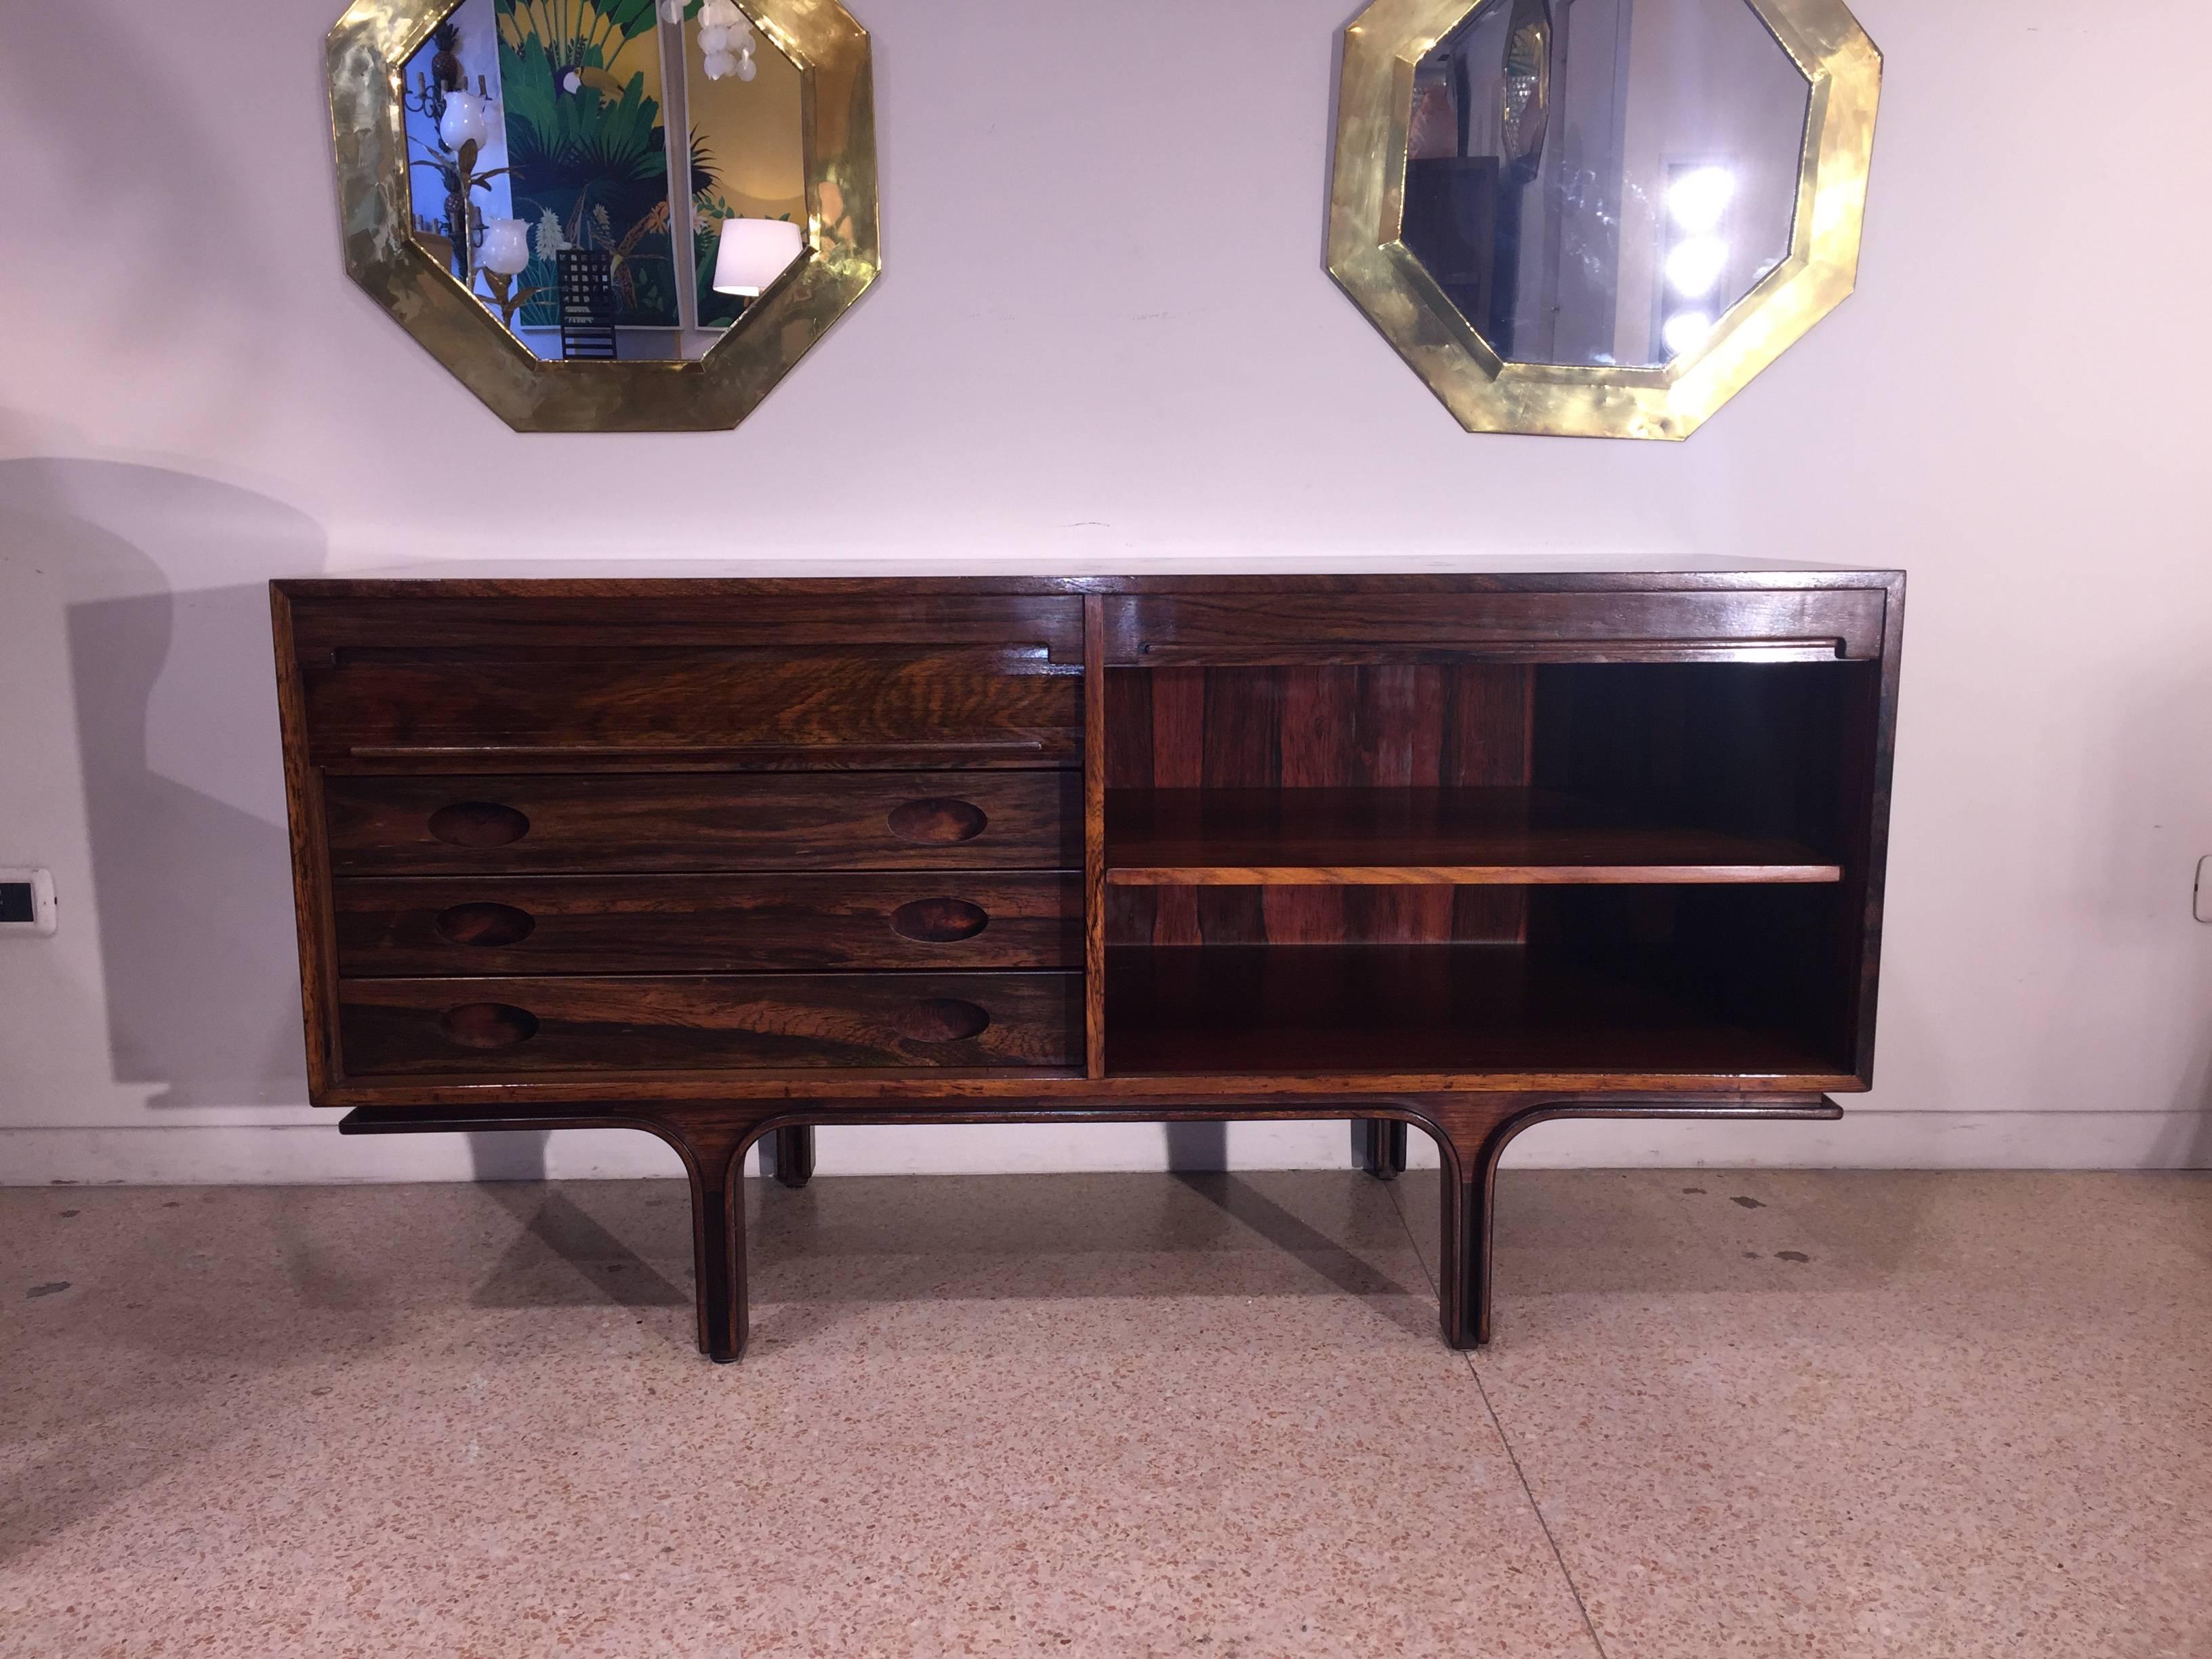 Original Italian elegant rosewood sideboard by Gianfranco Frattini, production Bernini since 1956
Serie 550.  Two section closed by rolling shutter. A shelf in one section, drawers on the other section. This piece is suitable to be placed in the